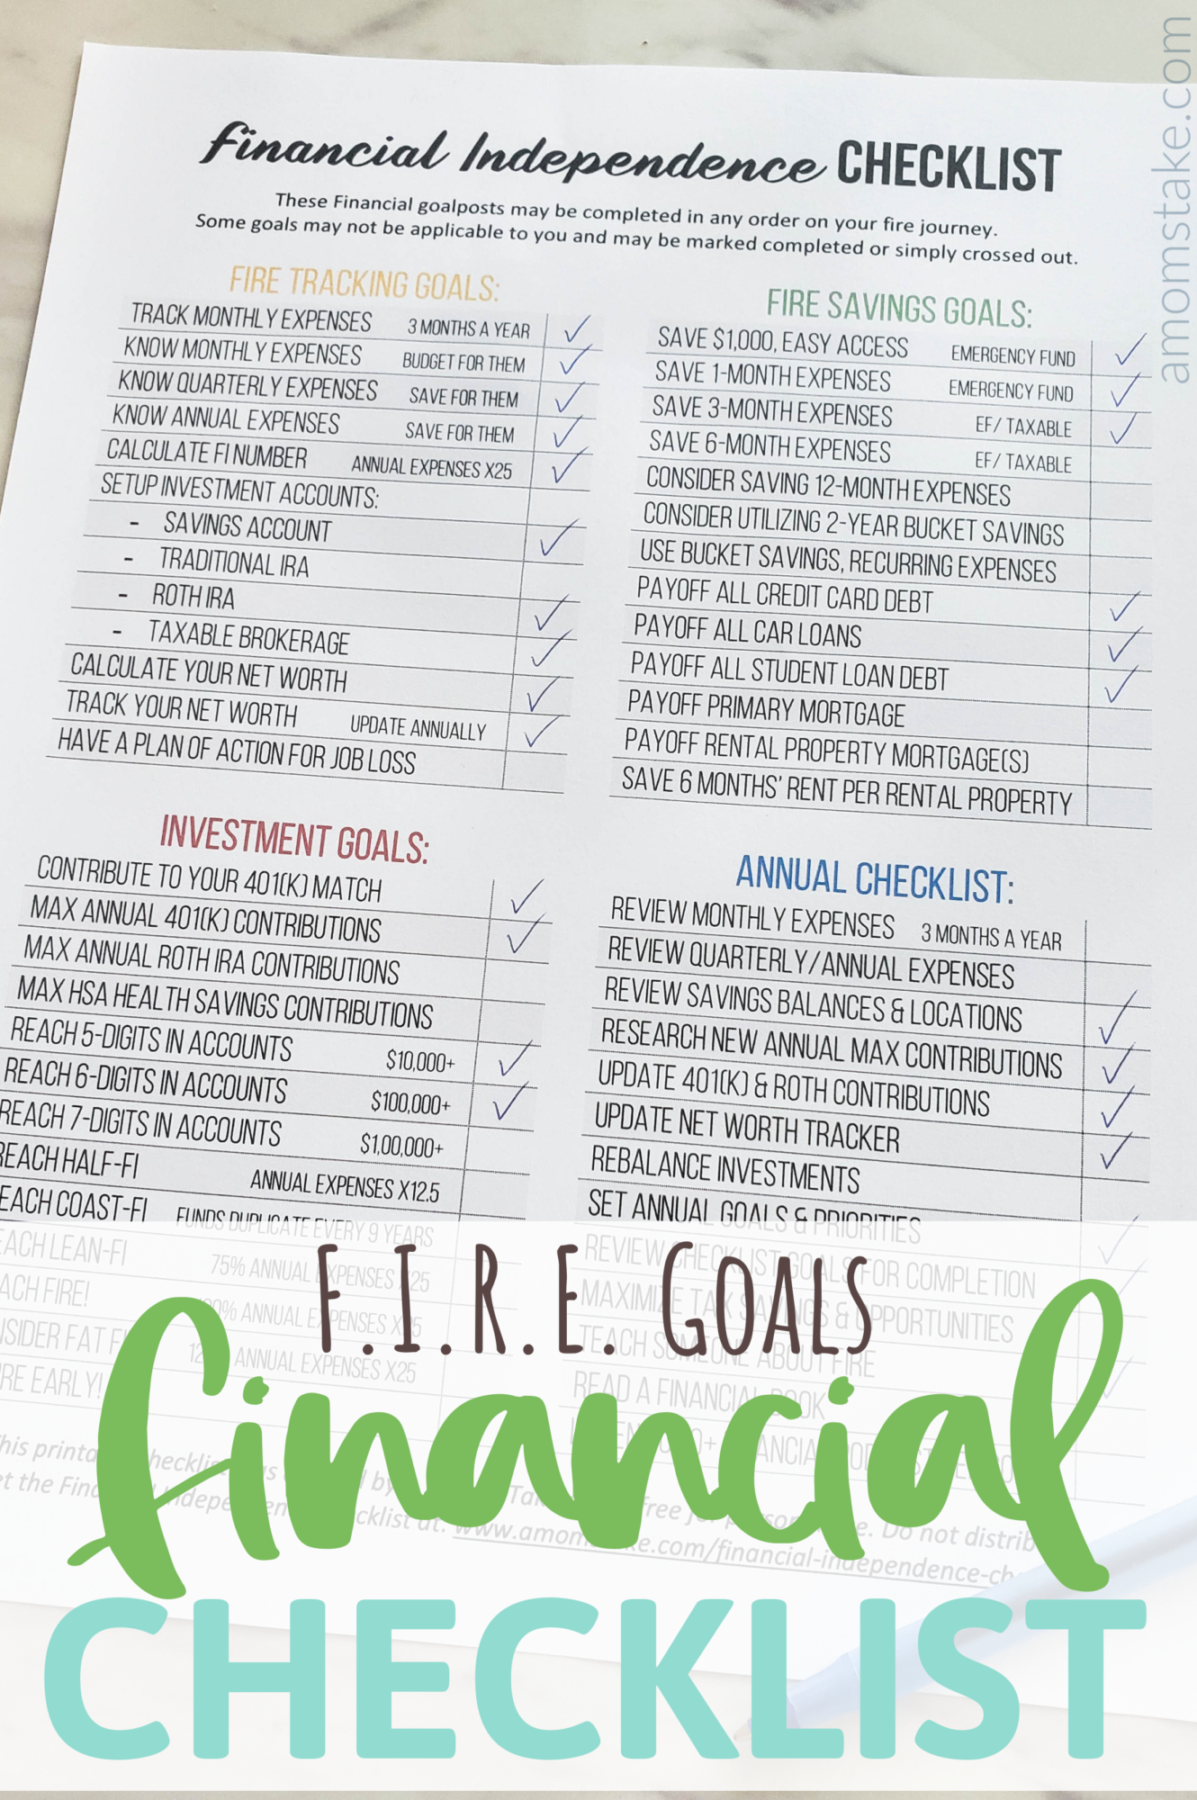 Financial Independence Checklist  - Printable F.I.R.E. goals and milestones